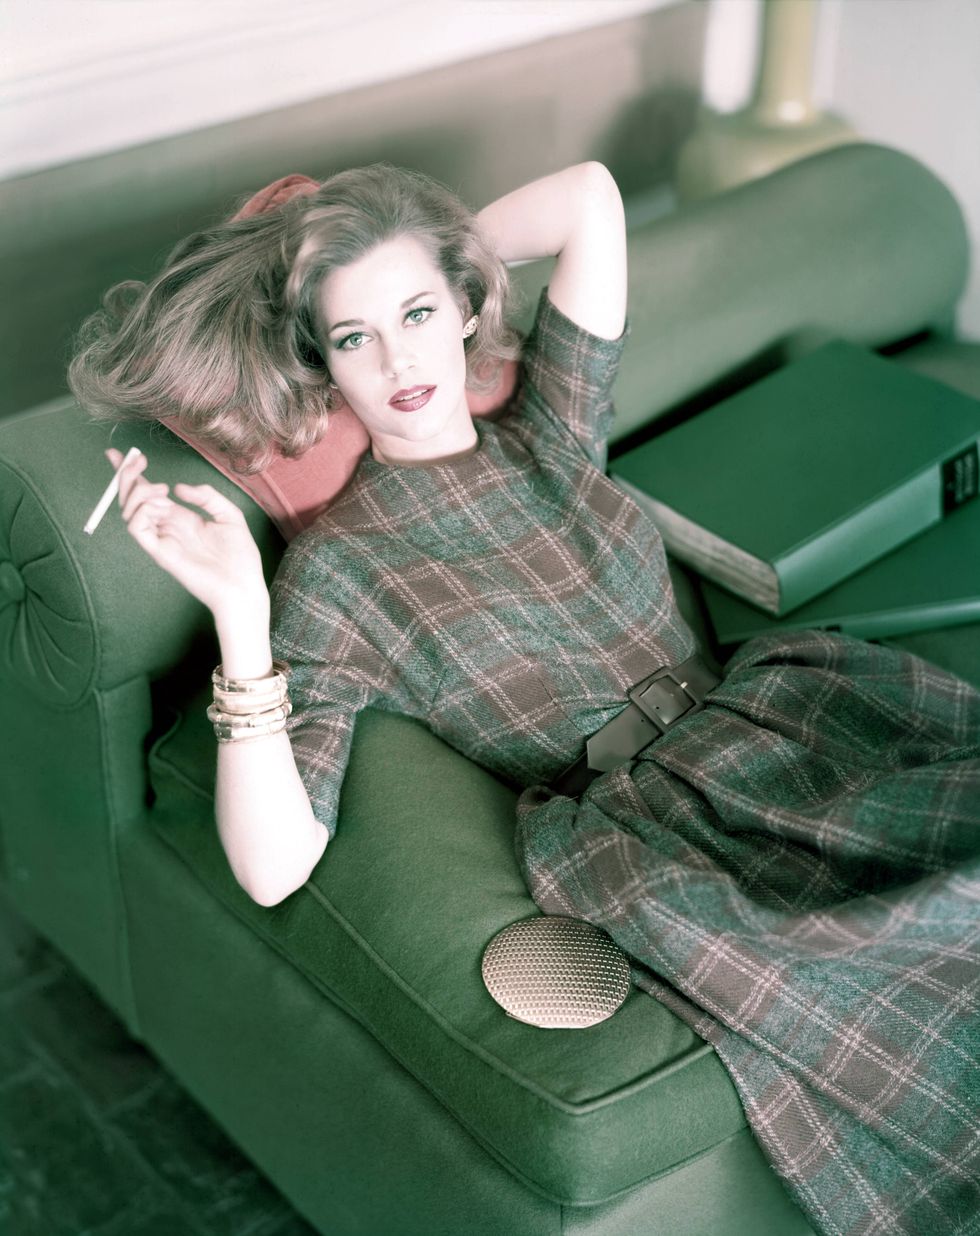 jane fonda with cigarette wearing plaid wool dress in brown and muted grey, cinched at the waist with brown suede belt photo by horst p horstconde nast via getty images